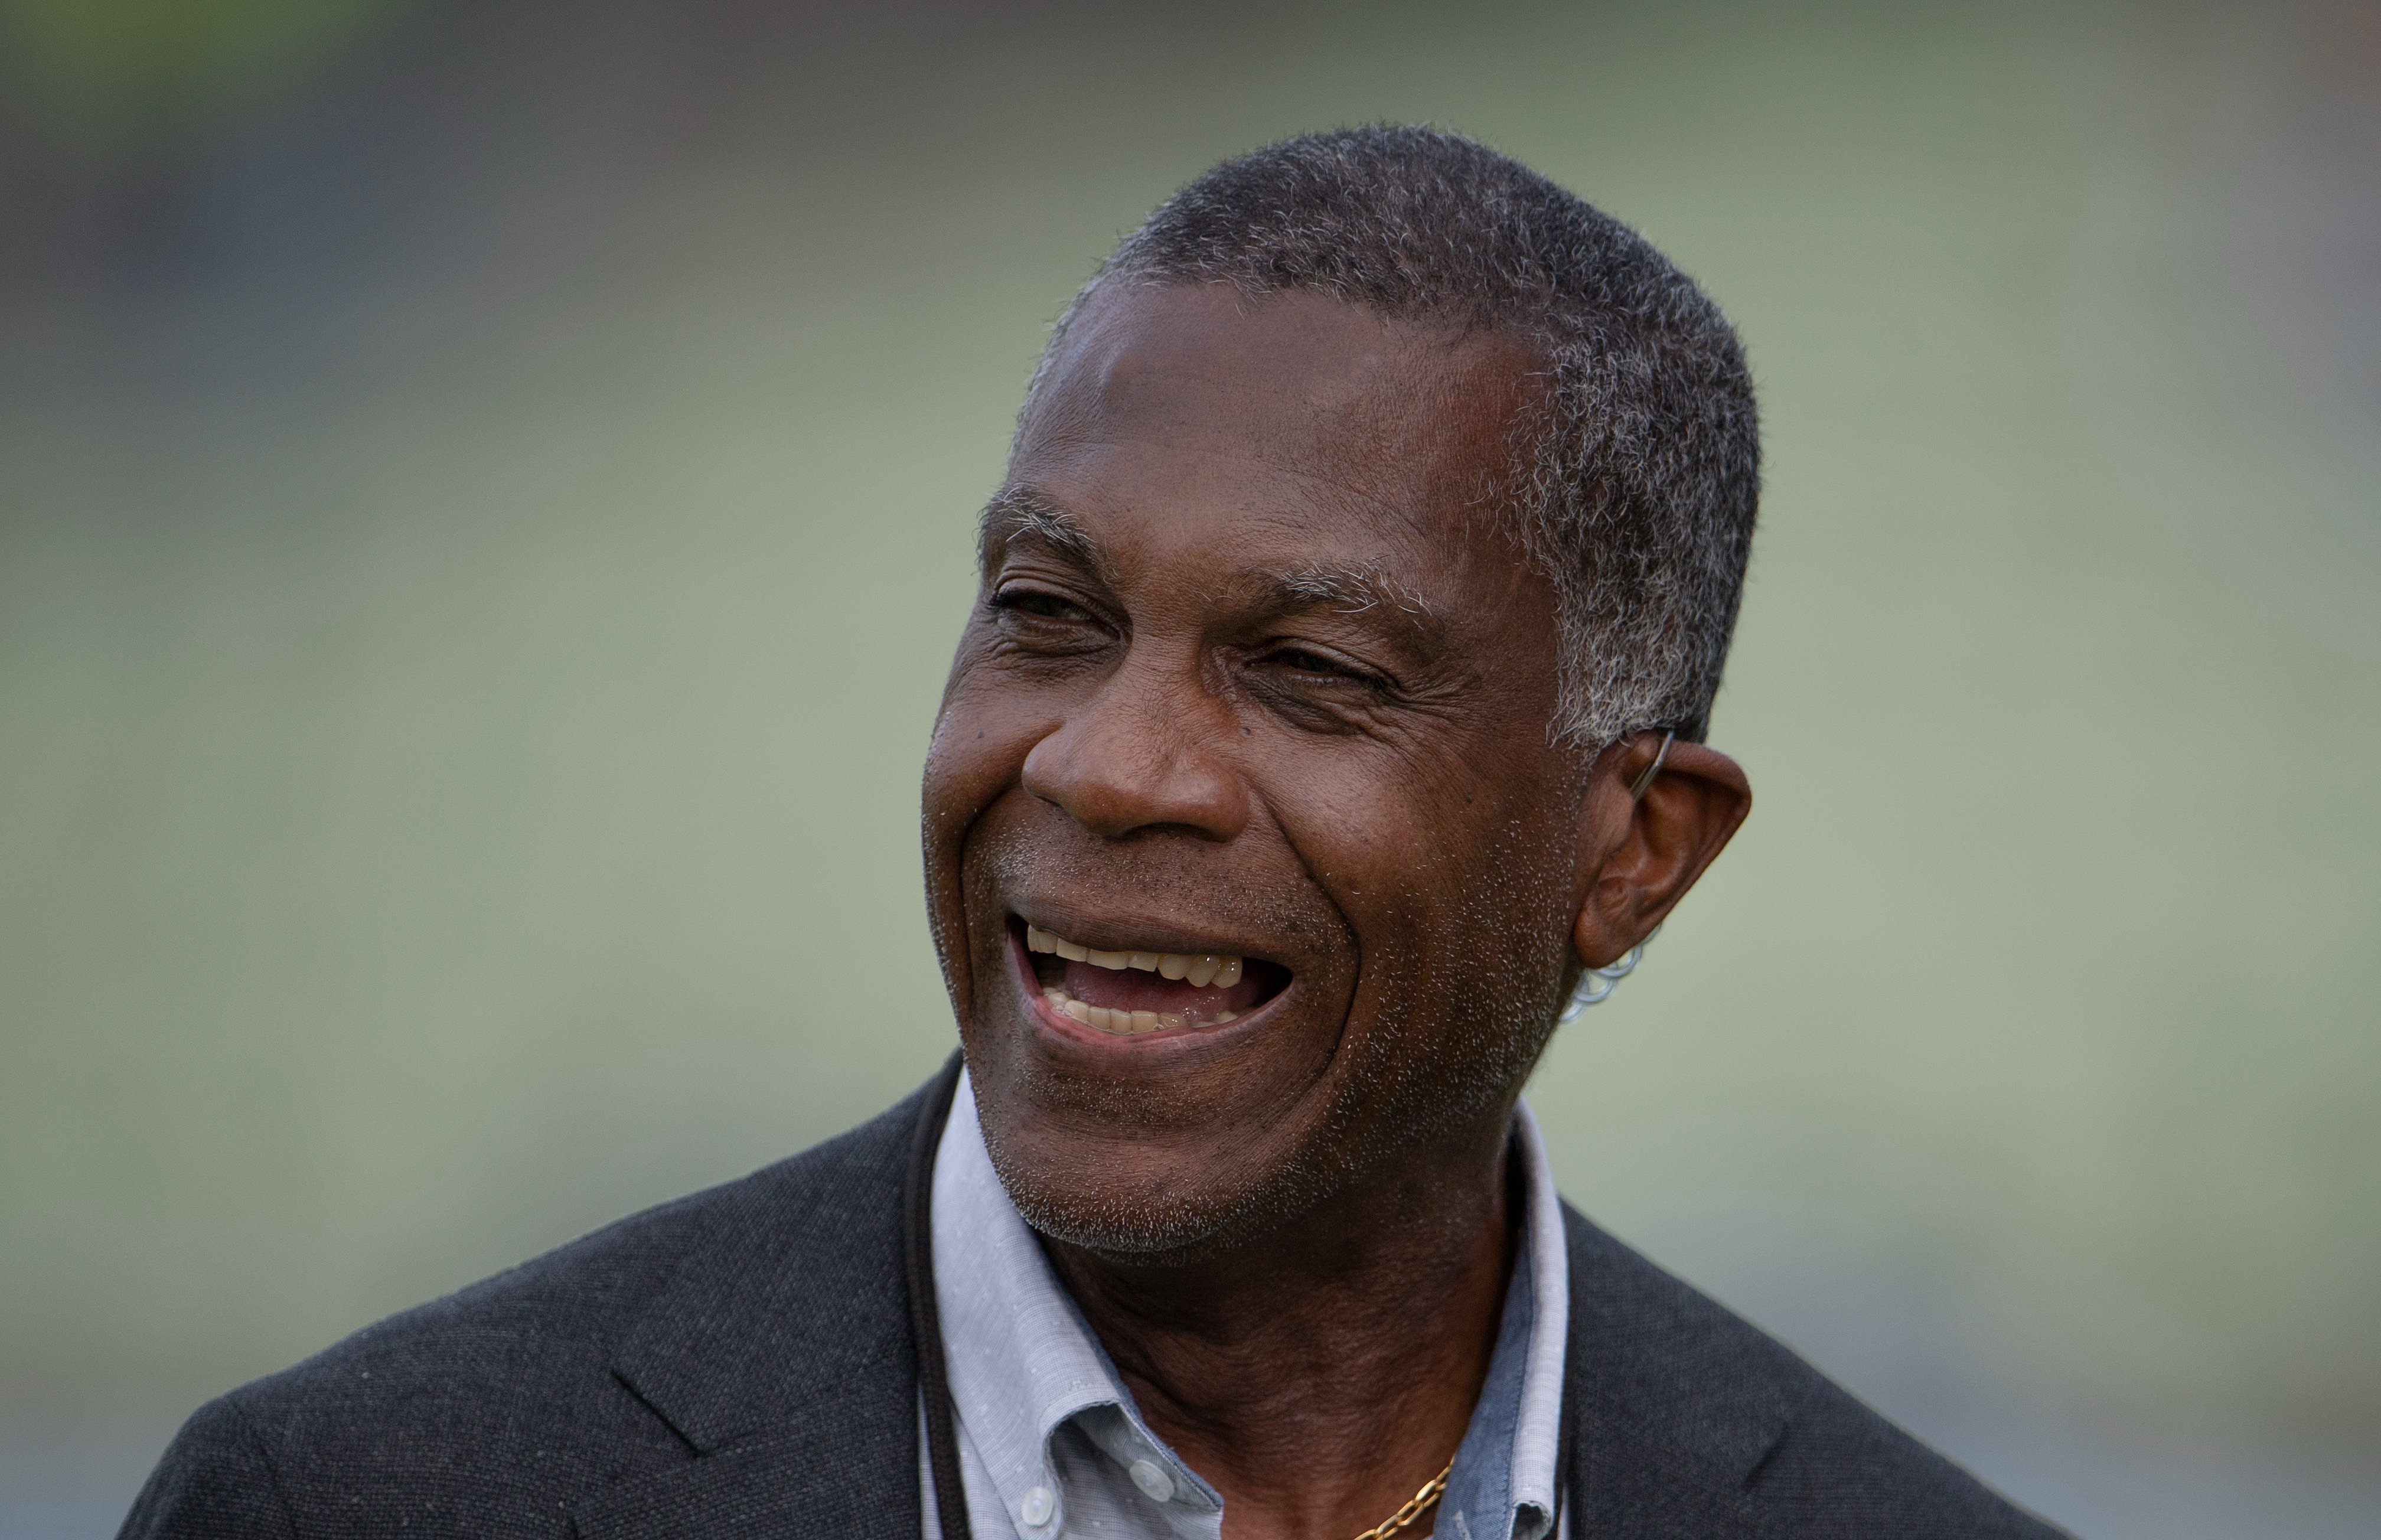 ENG vs IND | India should win the series handsomely, predicts Michael Holding